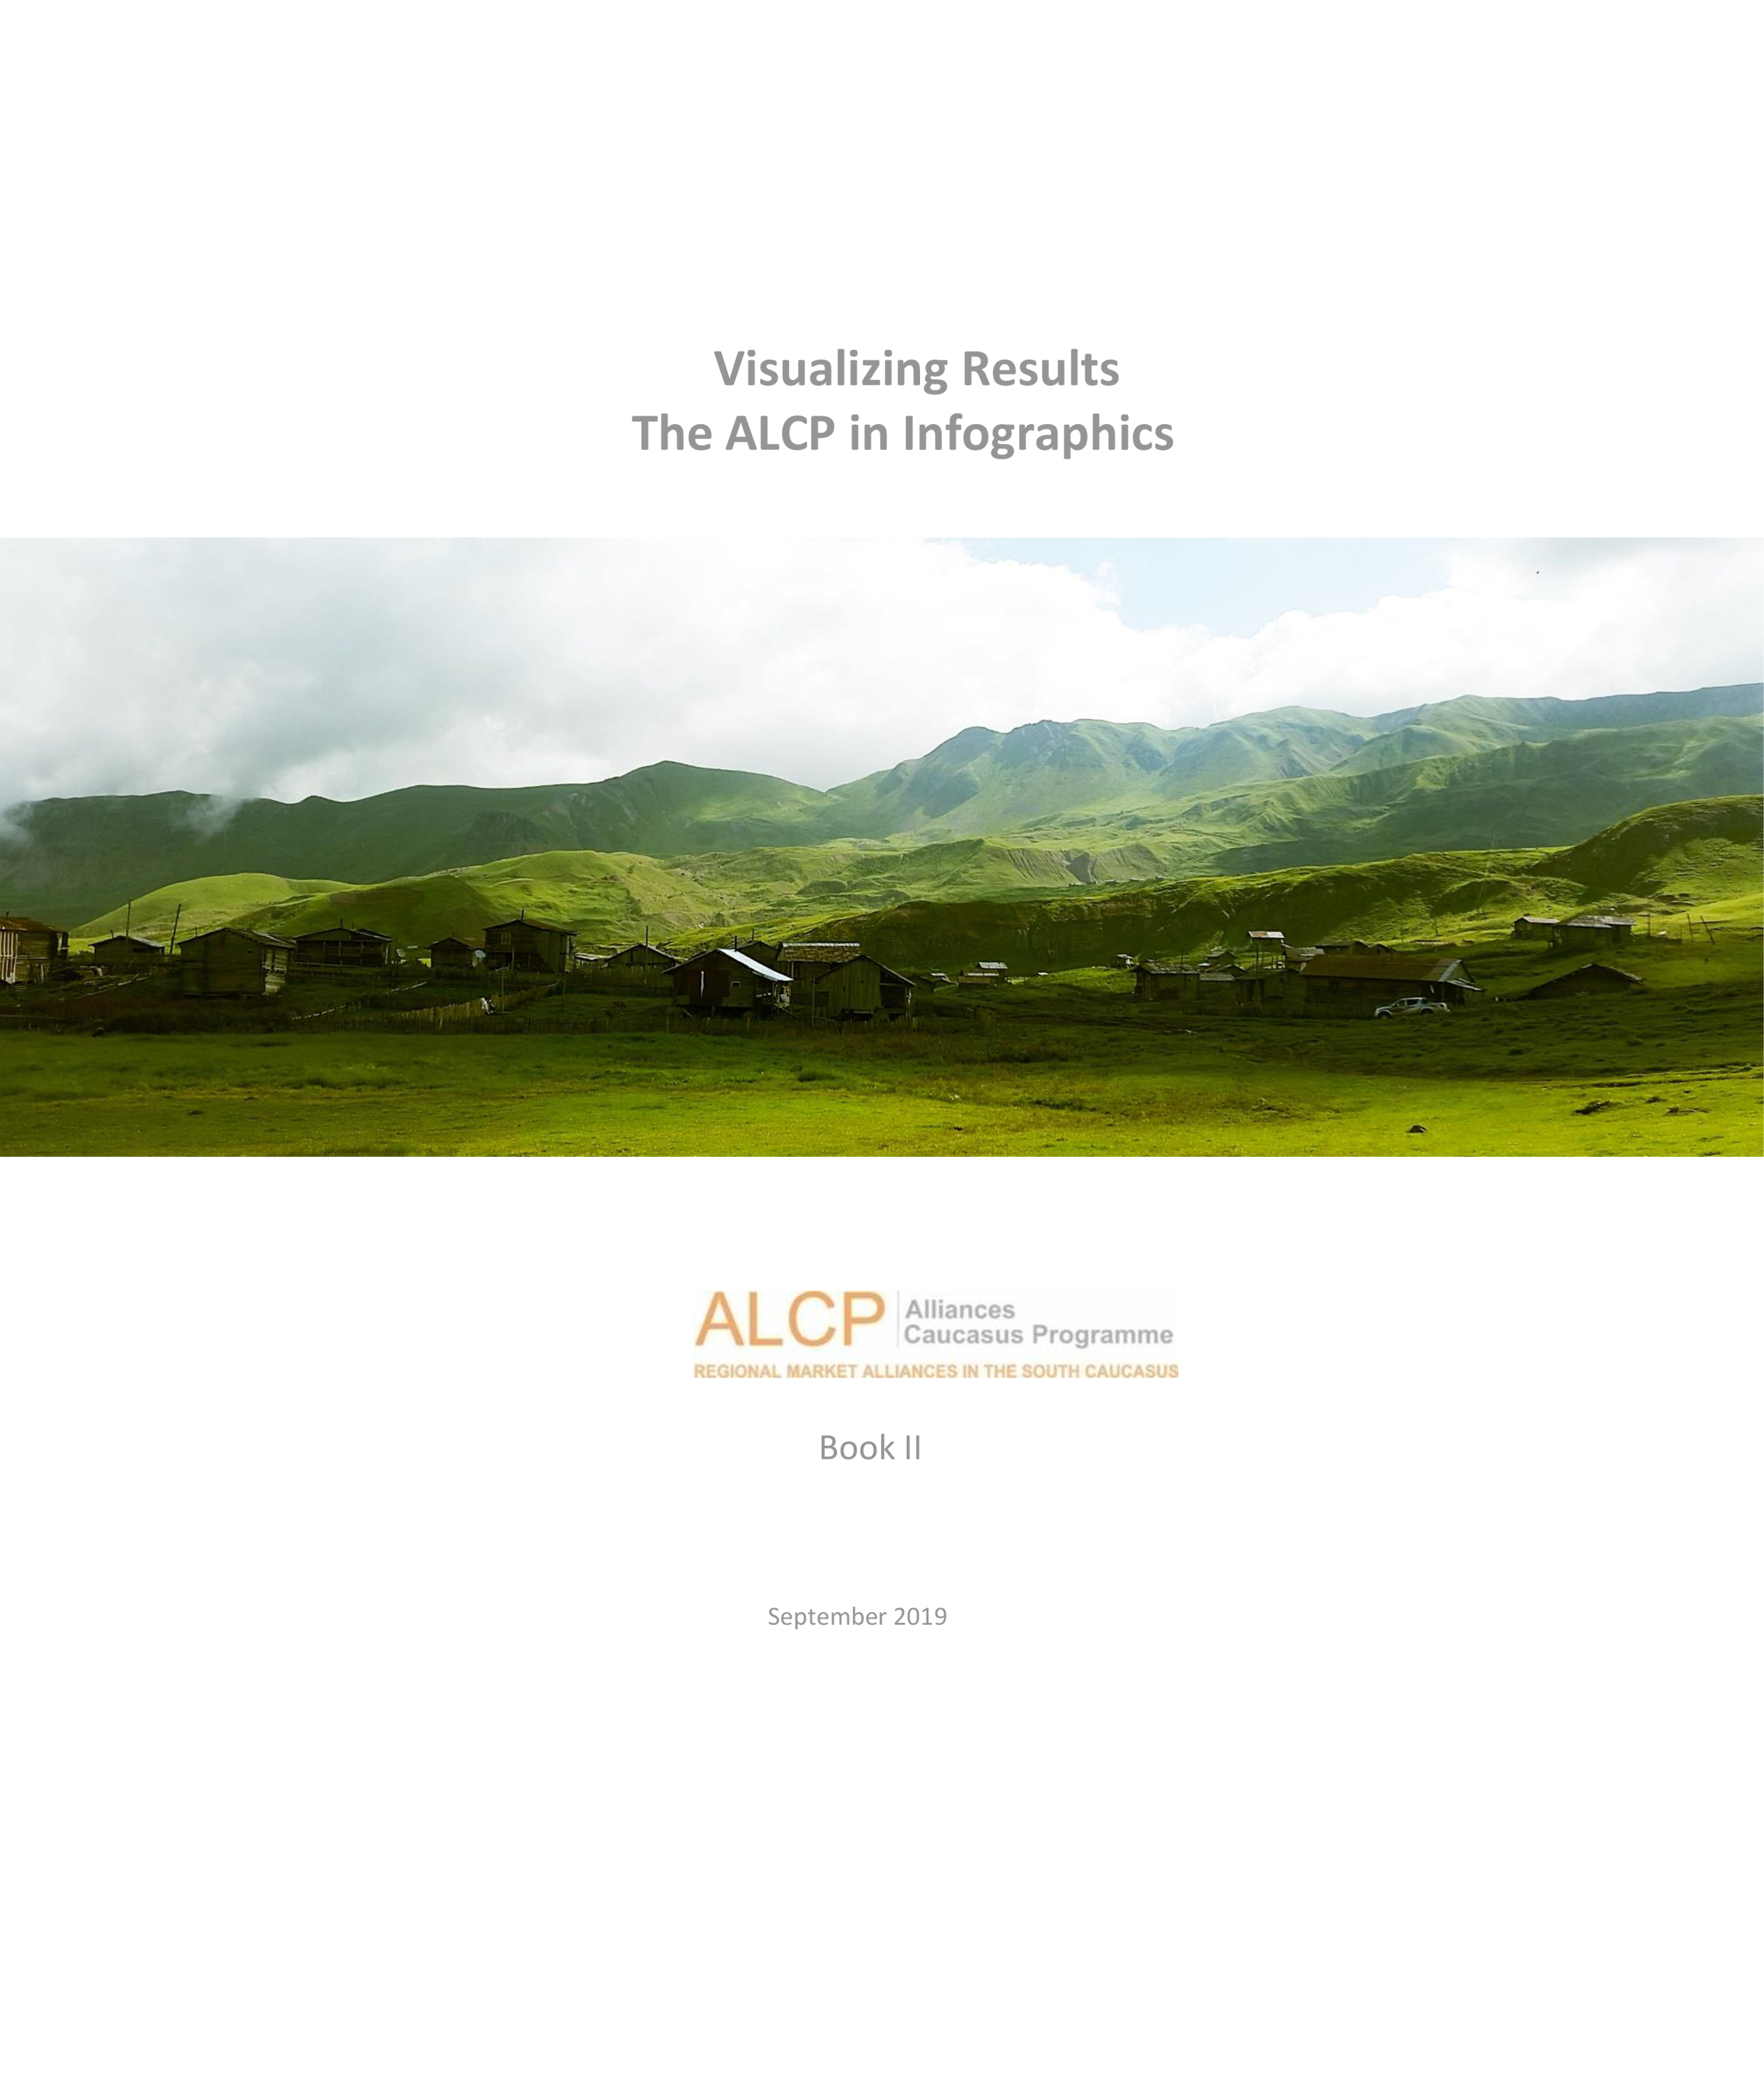 The ALCP in Infographics Book II